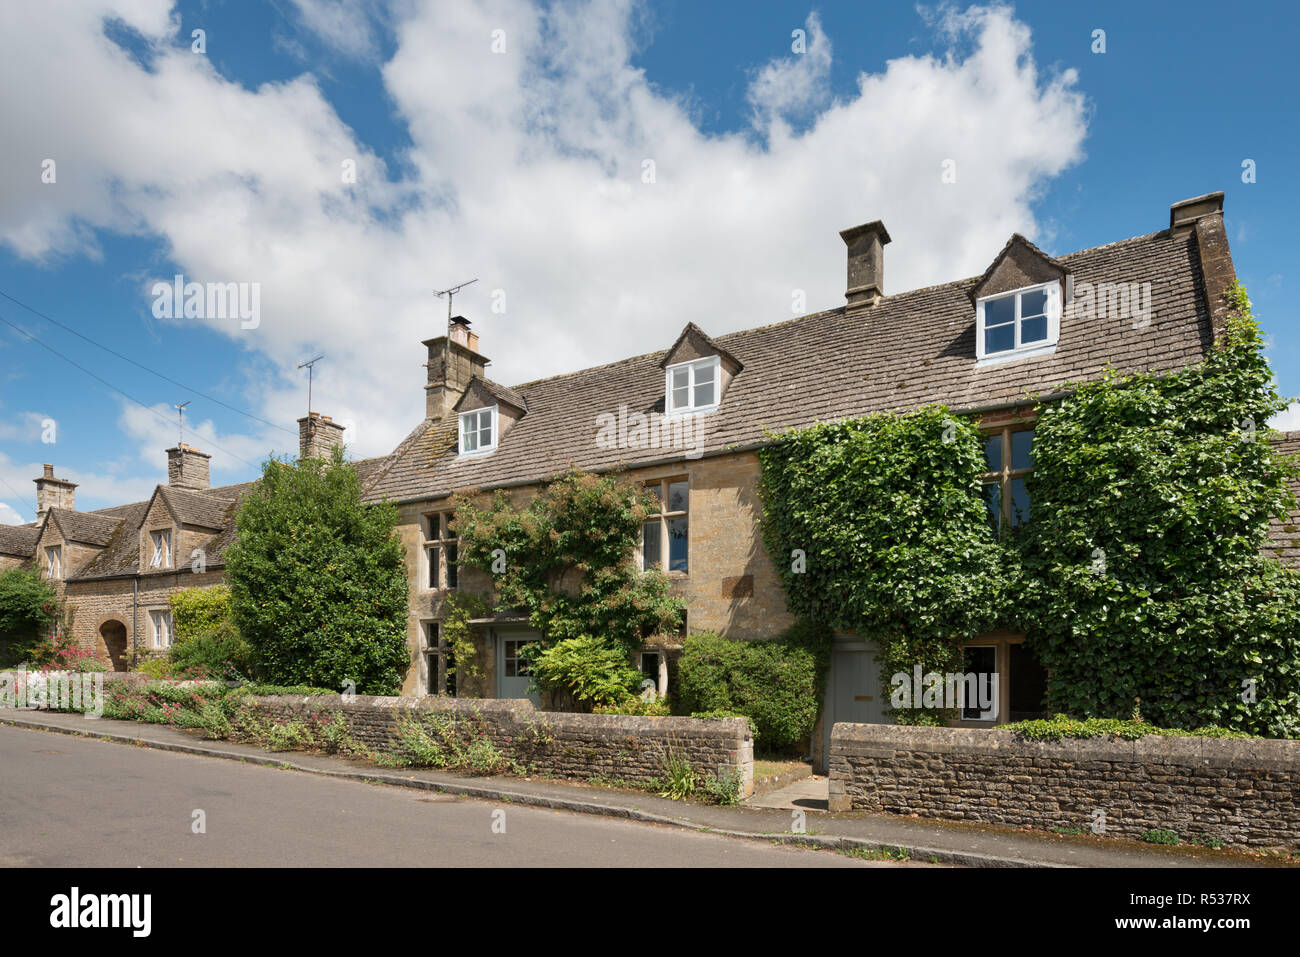 Residential properties in the village of Sandford St Martin, West Oxfordshire, England, United Kingdom, Europe Stock Photo